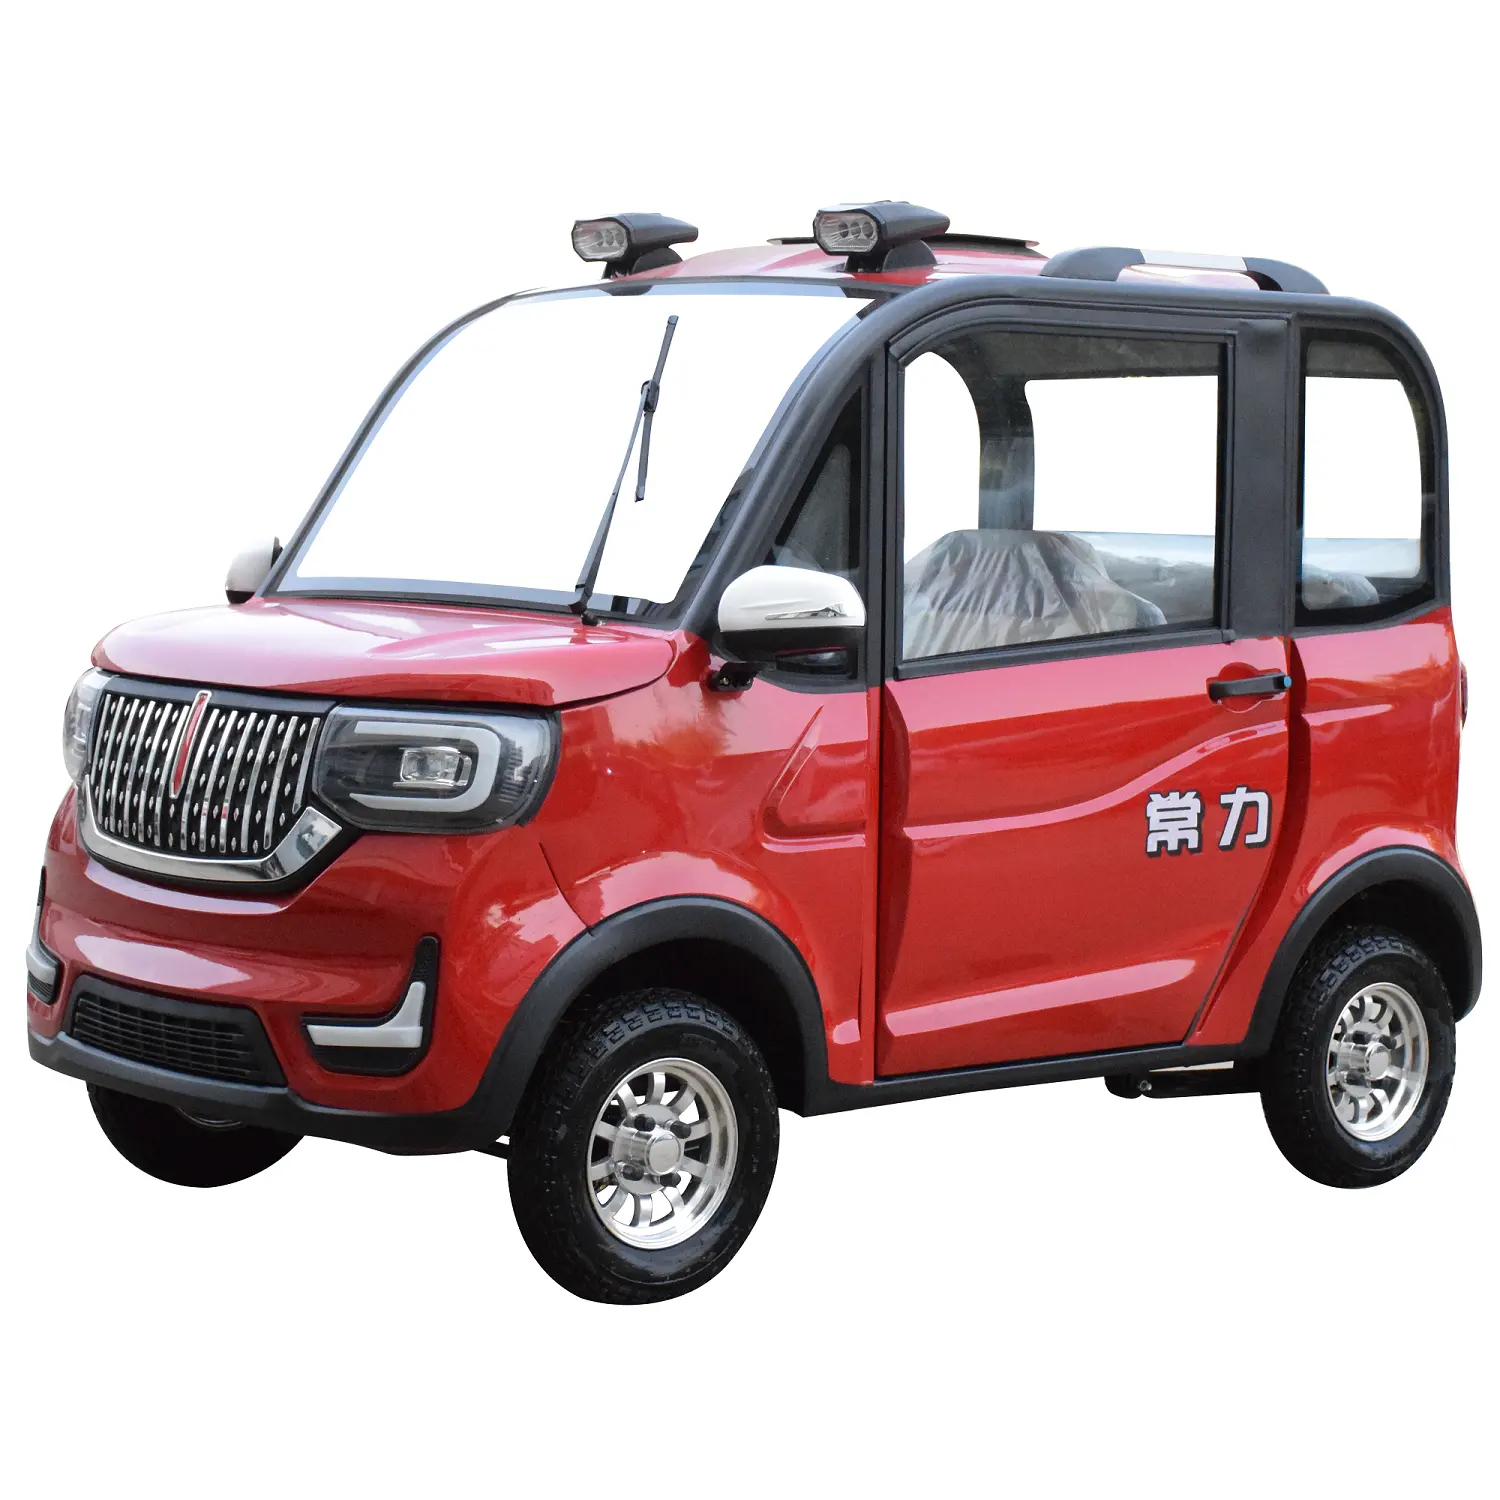 Chang li 2020 New Hot-Selling New Energy Electric Mini Four Wheel Car with Lower Price Made in China